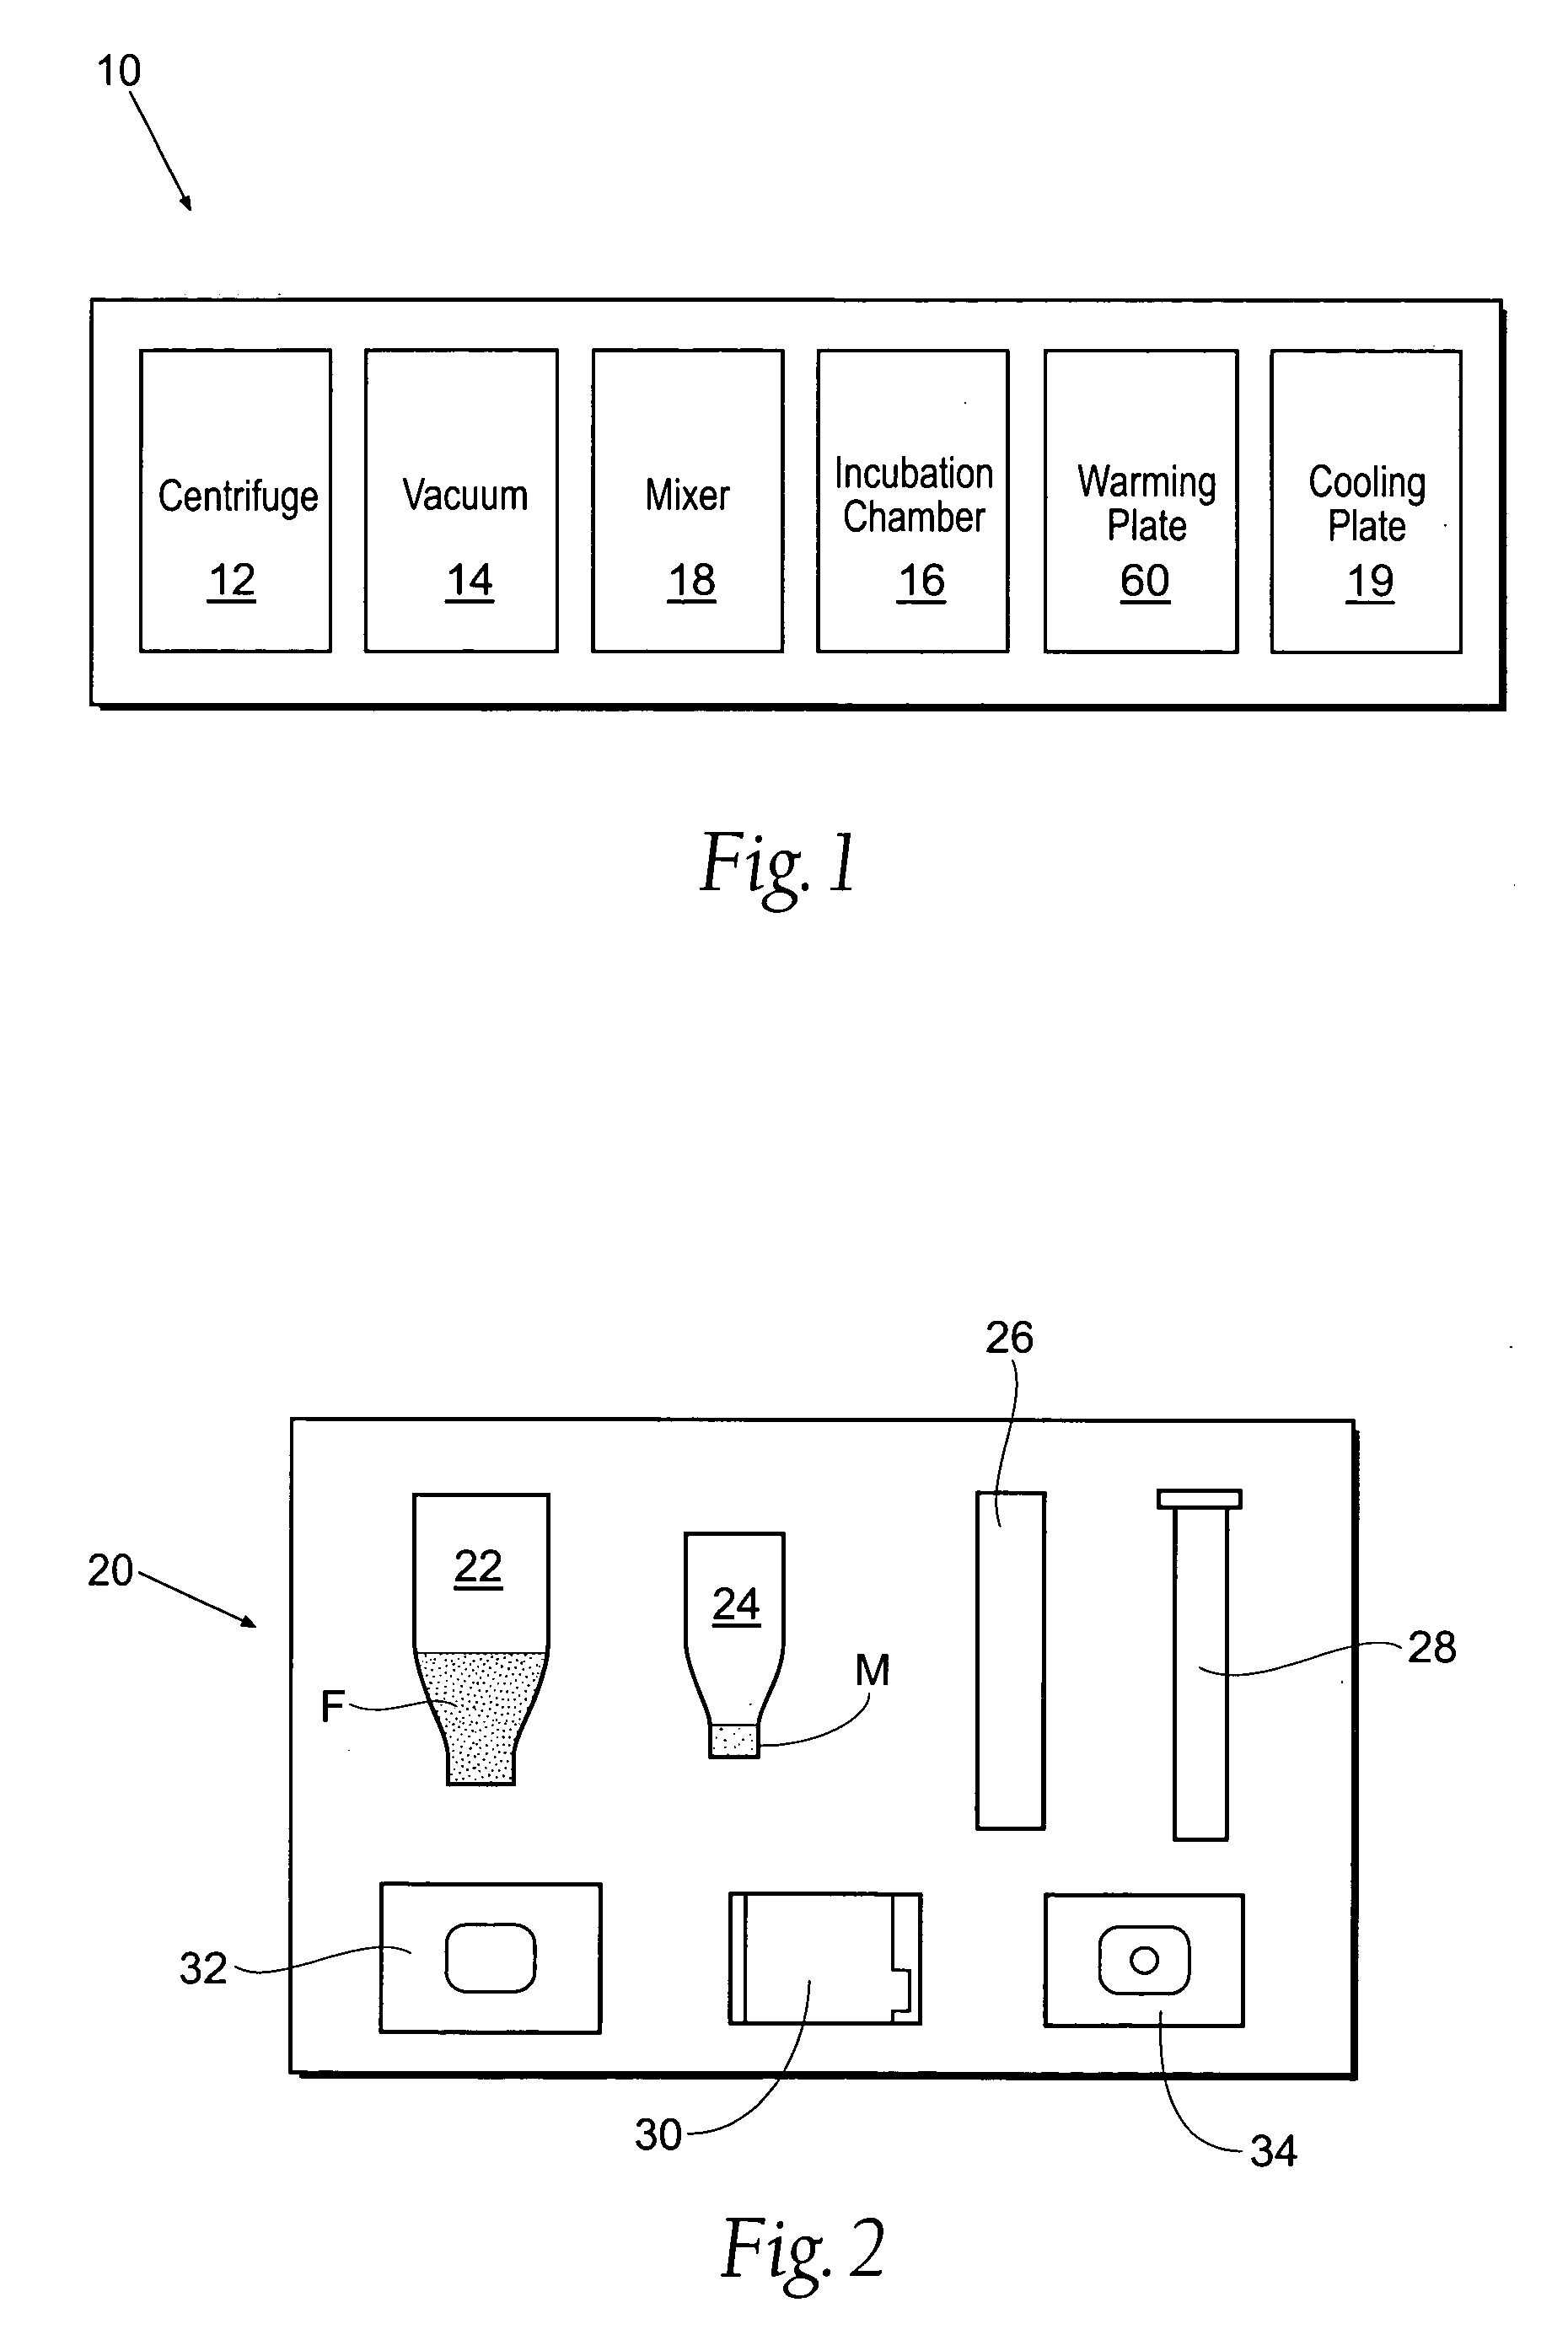 Cytoblock preparation system and methods of use